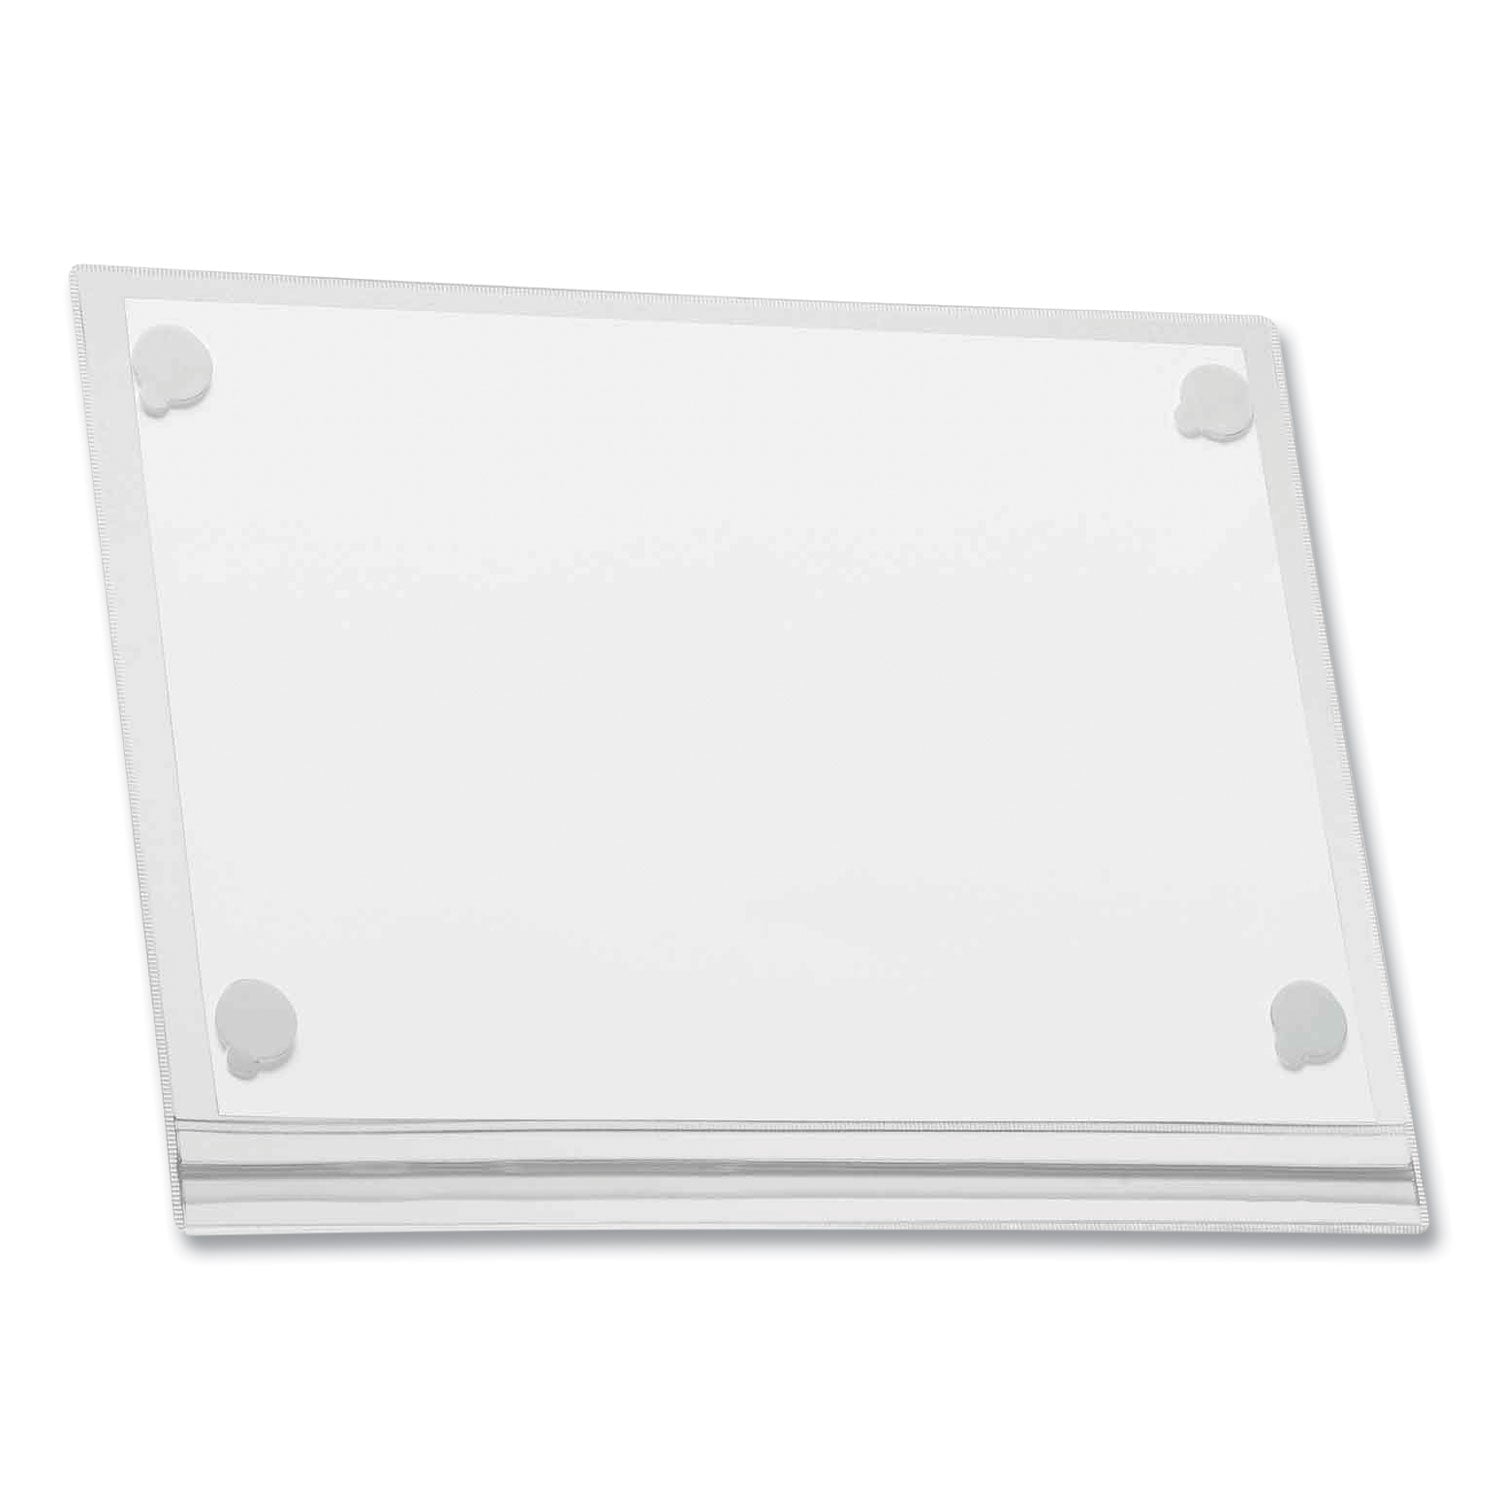 self-adhesive-water-resistant-sign-holder-85-x-11-clear-frame-5-pack_dbl501619 - 3